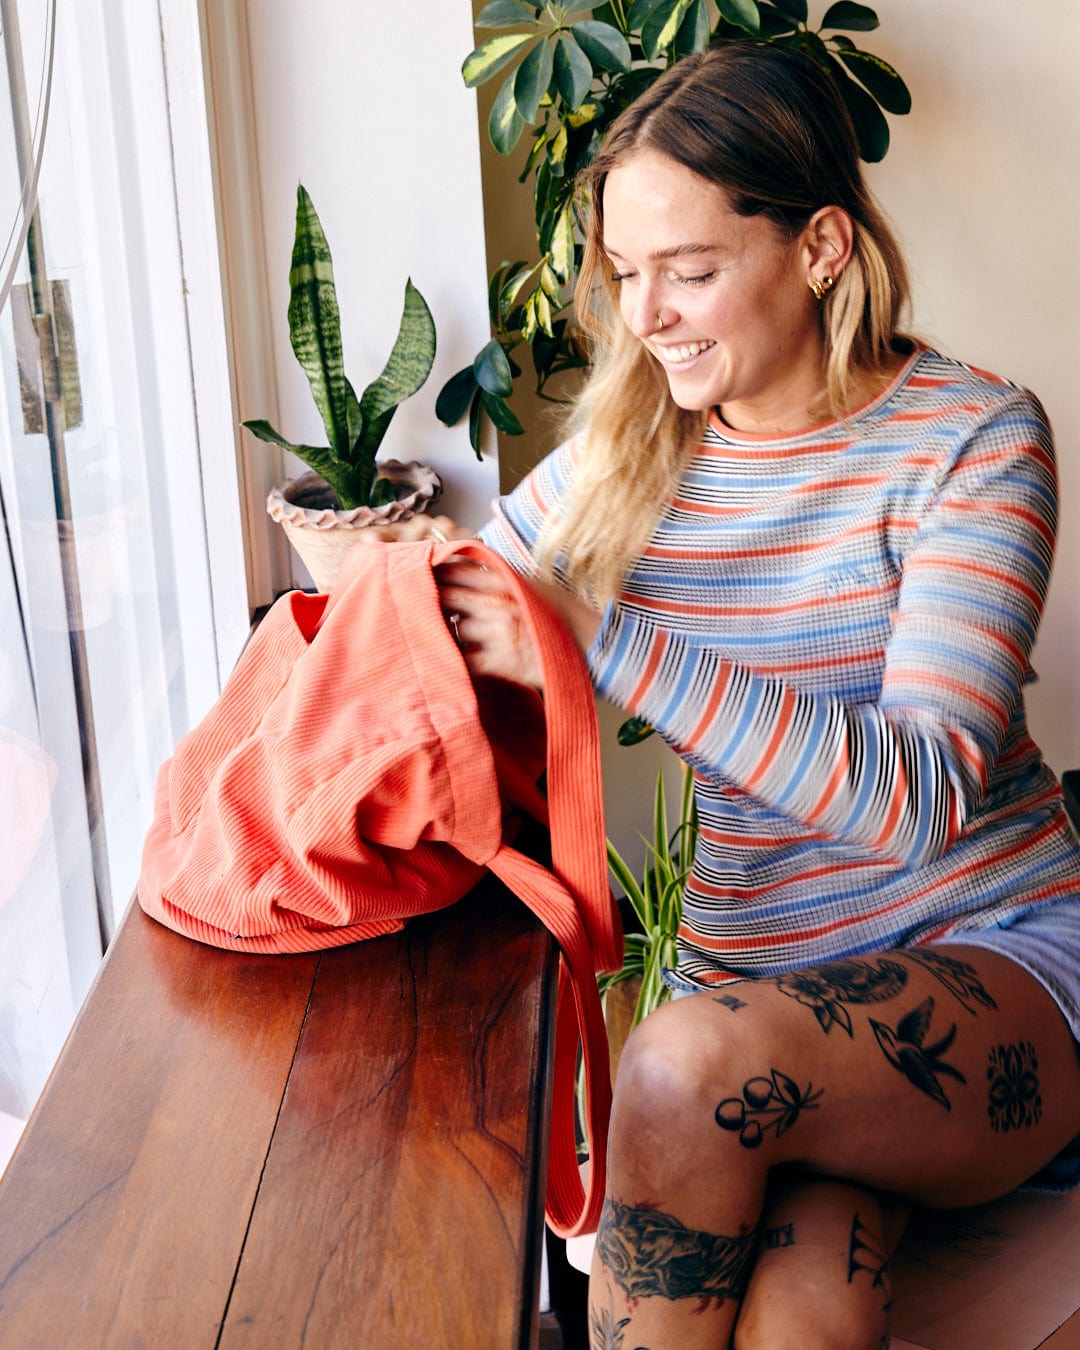 A woman with tattoos, smiling as she packs a Lanie - Womens Long Sleeve T-Shirt in Red into a red backpack at a wooden table near a window, the bag prominently featuring Saltrock branding.